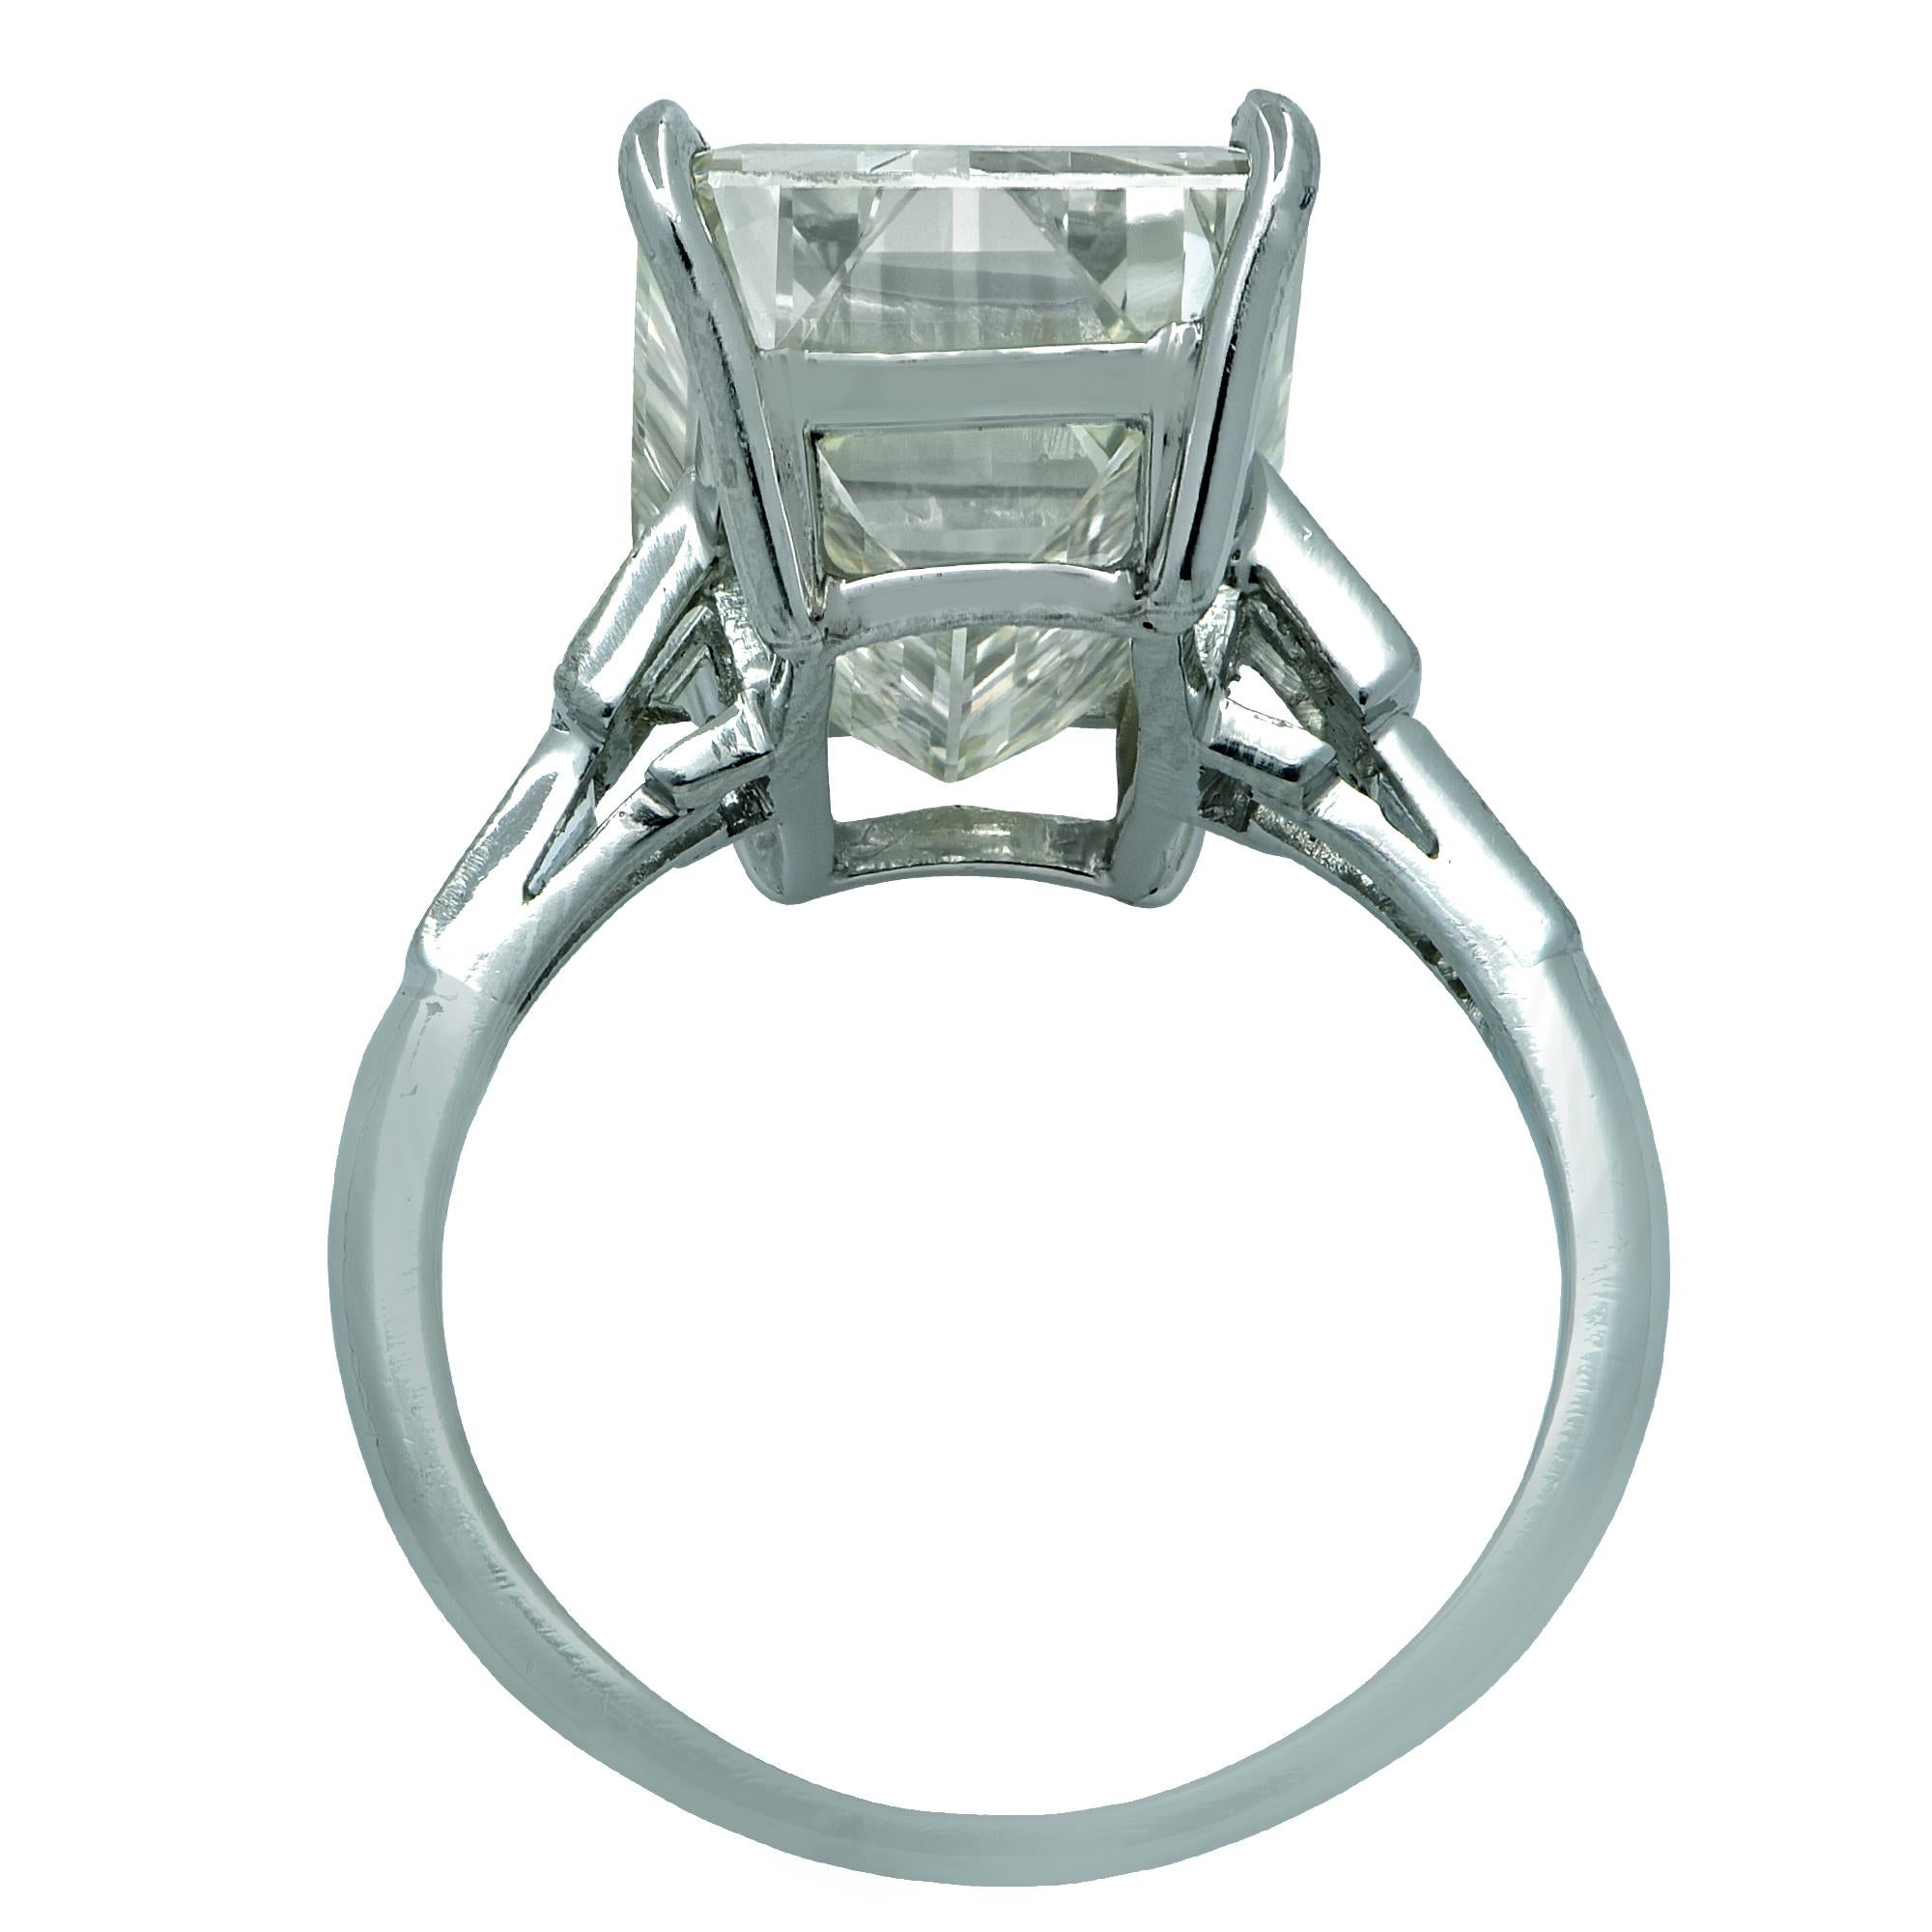 Simply stunning engagement ring crafted in platinum showcasing a stunning emerald cut diamond weighing an impressive 12.84 carats, Y-Z color GIA, VVS clarity. The band of the ring is adorned with 6 baguettes weighing .60 carats, I-J color, VS